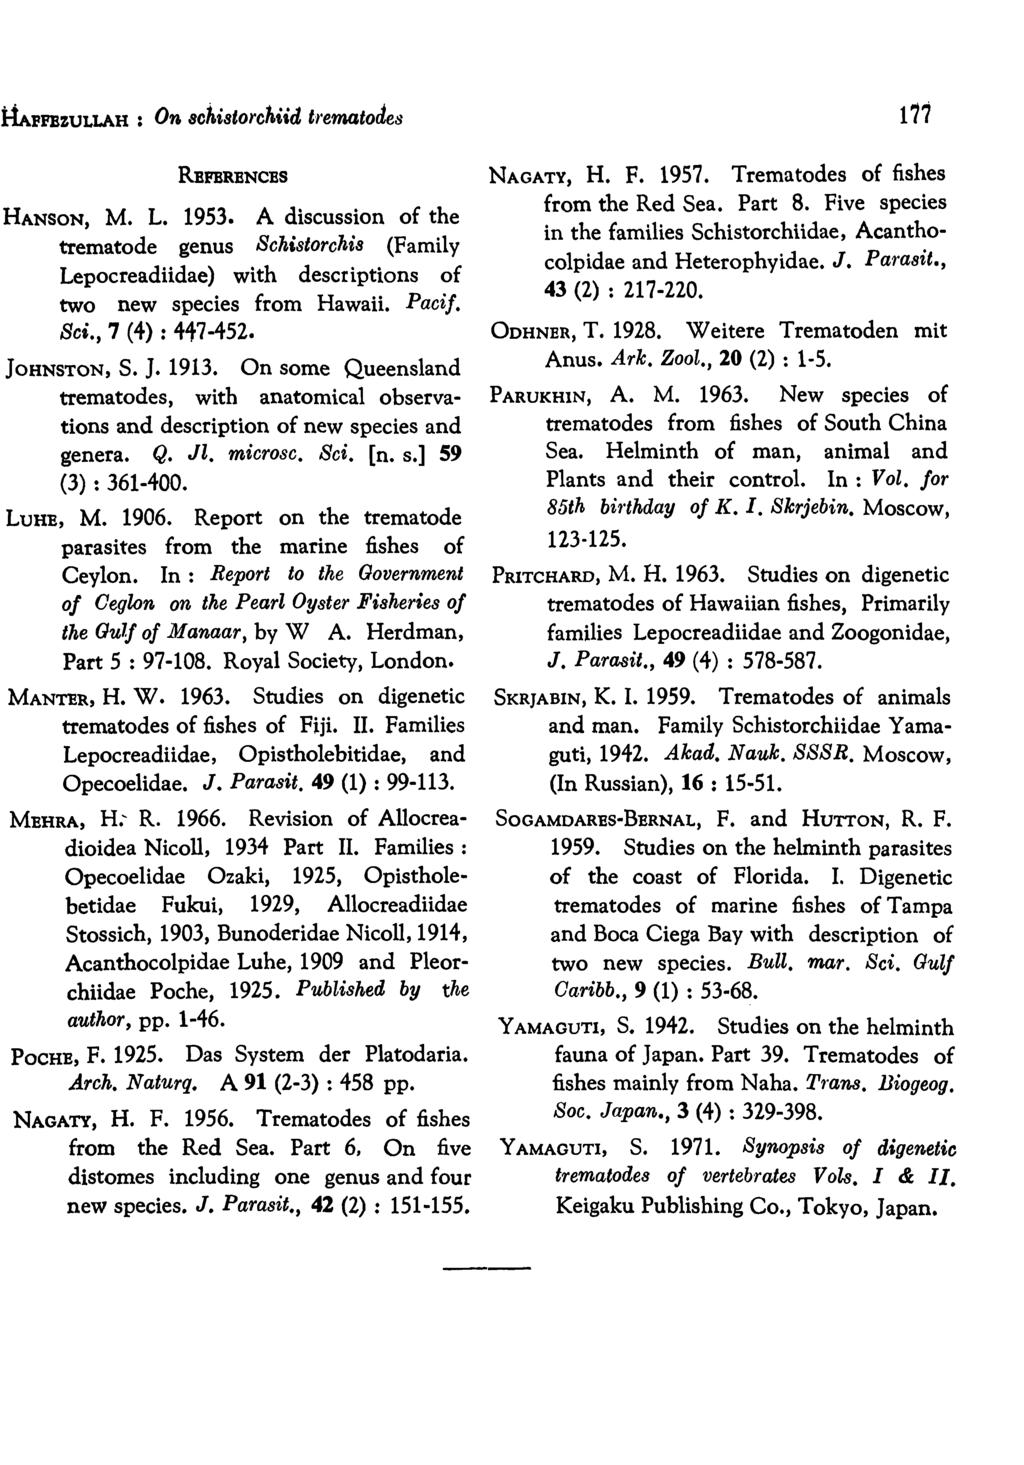 &PPEZULLAH : On 8chi8torc'hiid trematodes REPBRBNCBS HANSON, M. L. 1953. A discussion of the trematode genus Schistorchi8 (Family Lepocreadiidae) with descriptions of two new species from Hawaii.